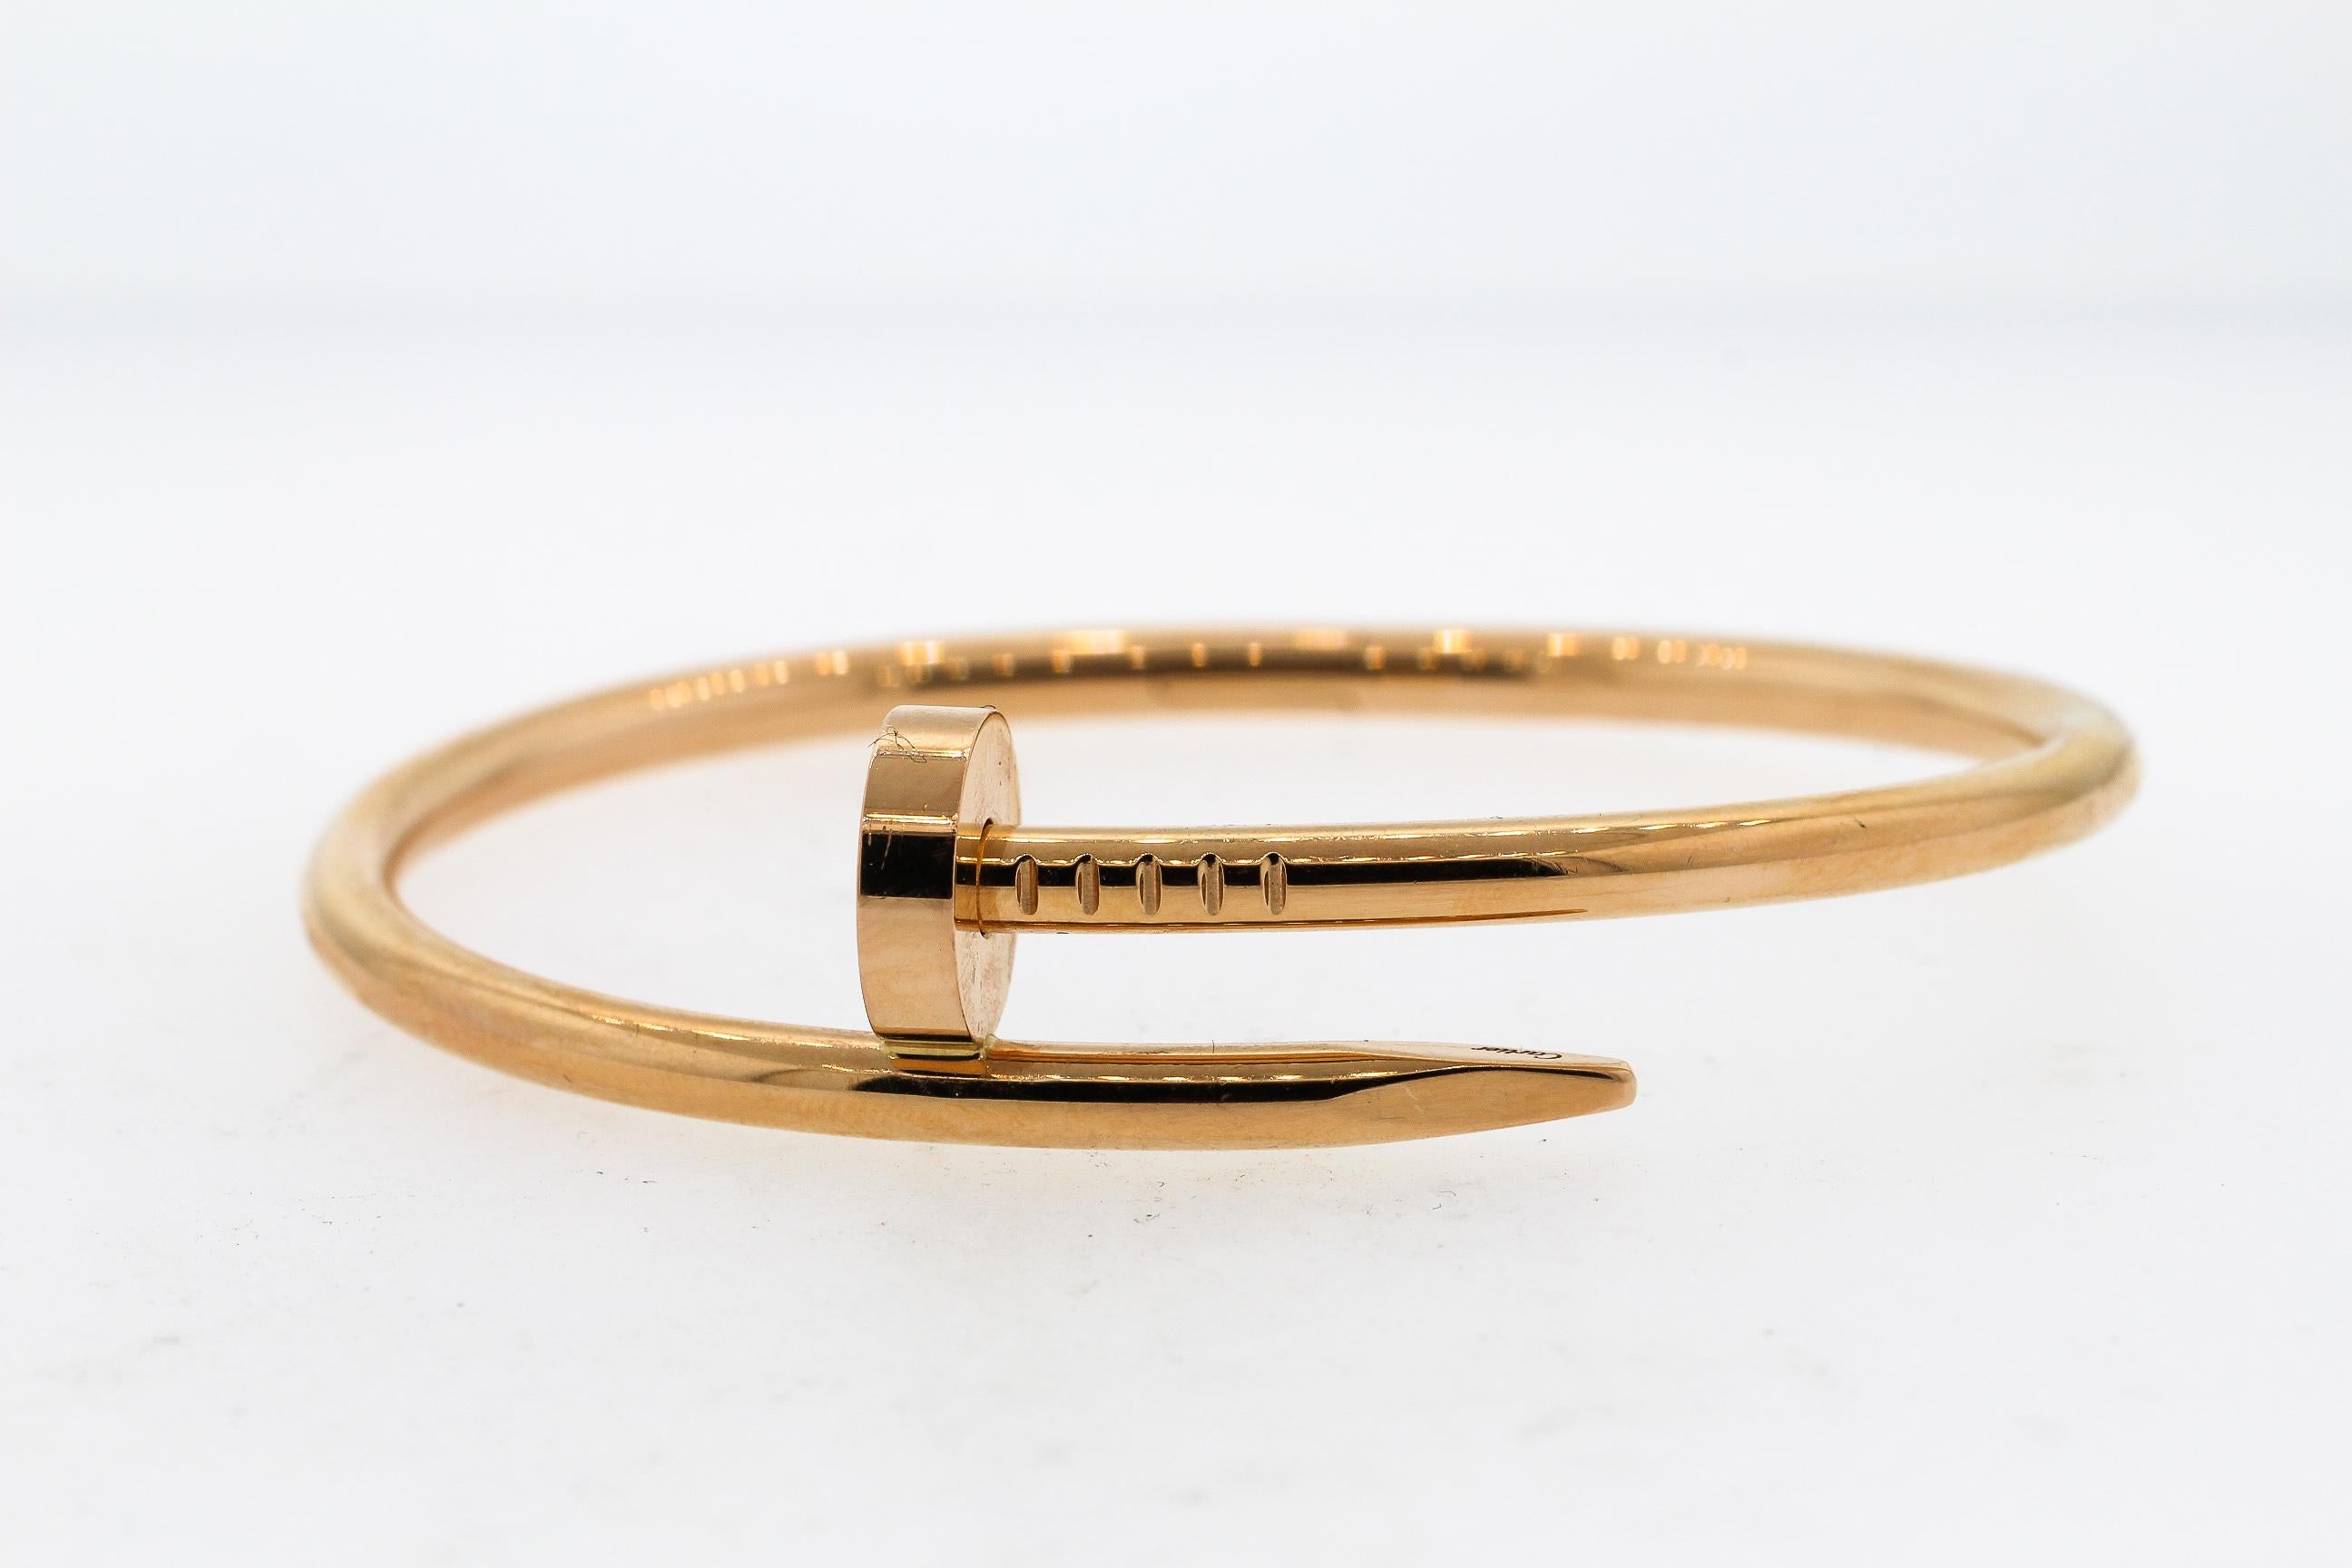 An authentic Juste un Clou bracelet by Cartier made in 18K rose gold. This hinged bracelet is size 16 (referring to 16 cm circumference). The bracelet is stamped Cartier 16 GBN663 Au750 (referring to 18k gold). There are makers marks. The bracelet